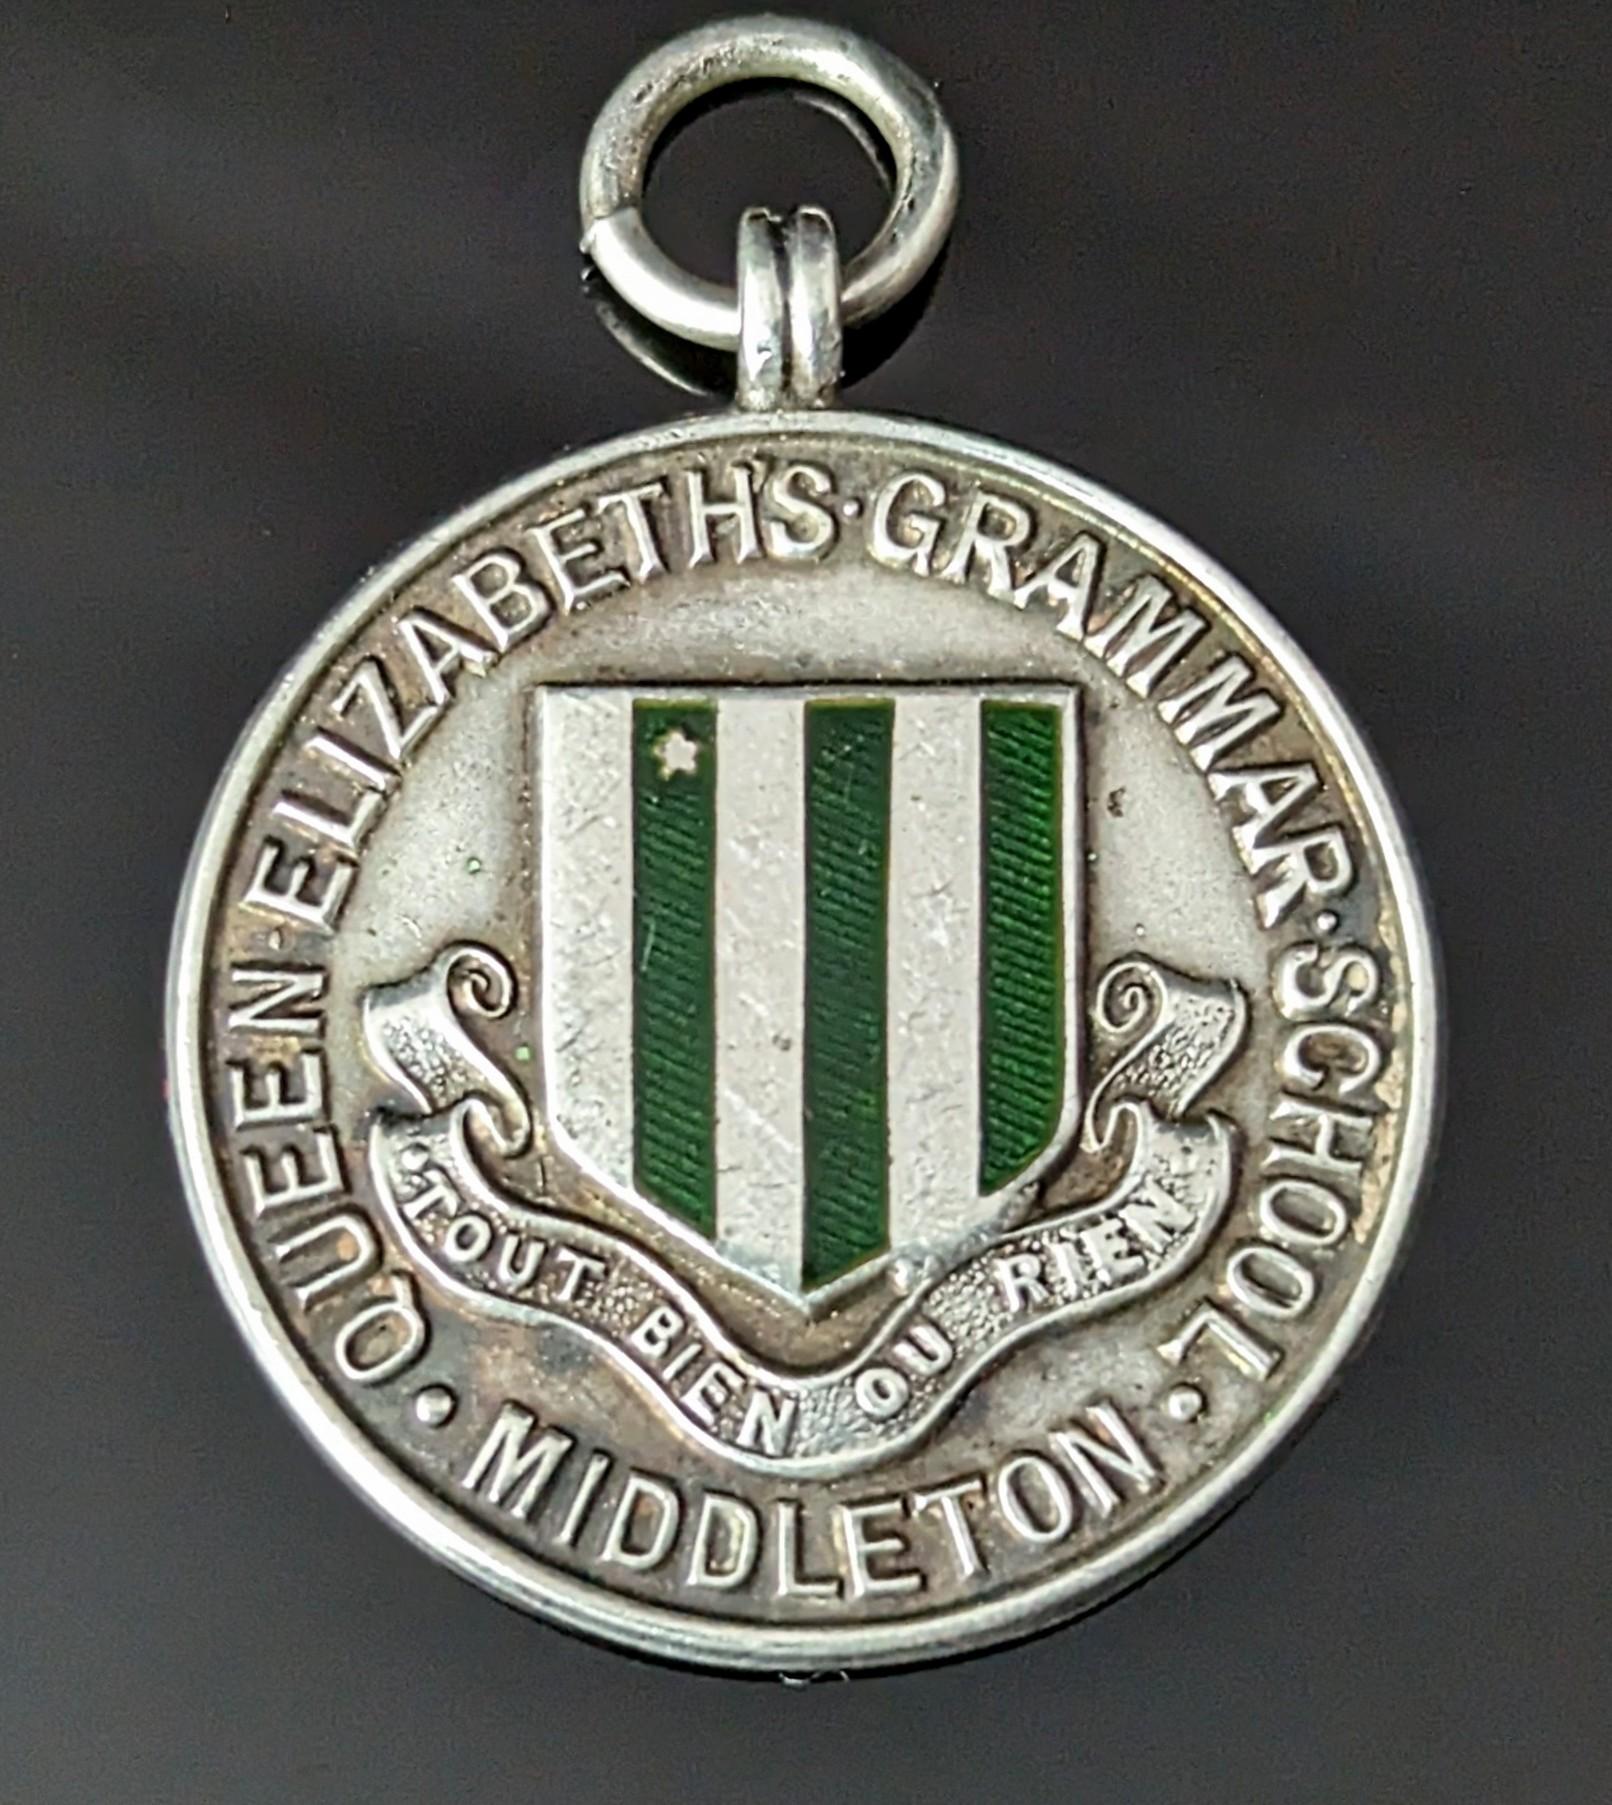 An attractive vintage sterling silver and enamel fob pendant.

It is a circular shaped piece with an attractive forest green enamelled design, the green enamel shield to the front representing Queen Elizabeth's Grammar School with the French text